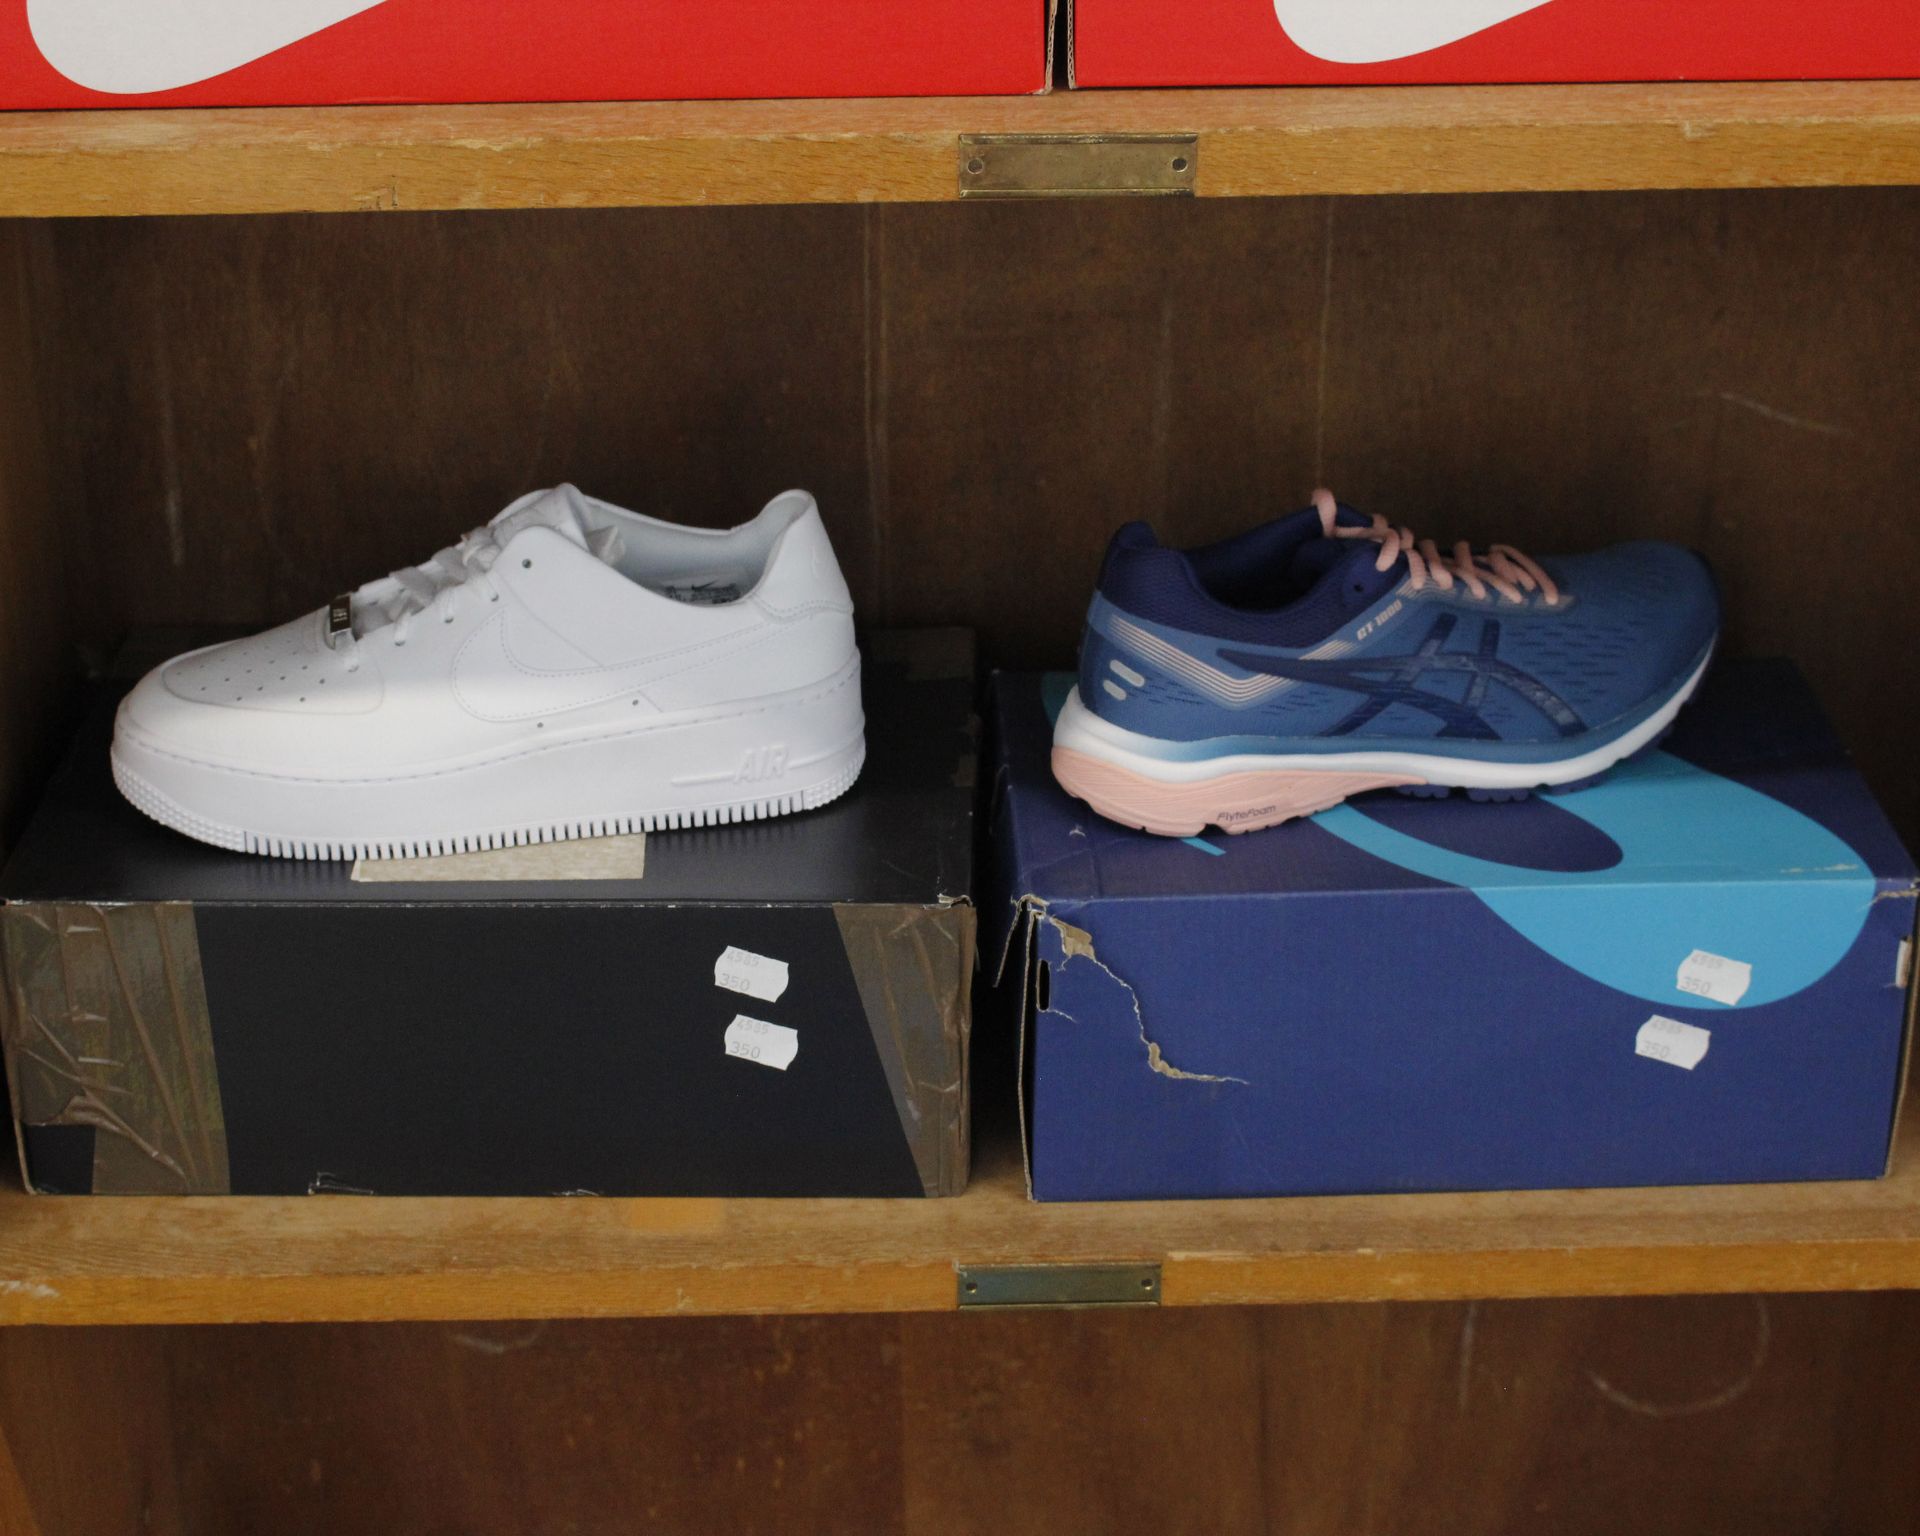 One pair of lady's boxed as new AF1 Sage Low trainers in white (UK 6) and one pair of lady's Asics